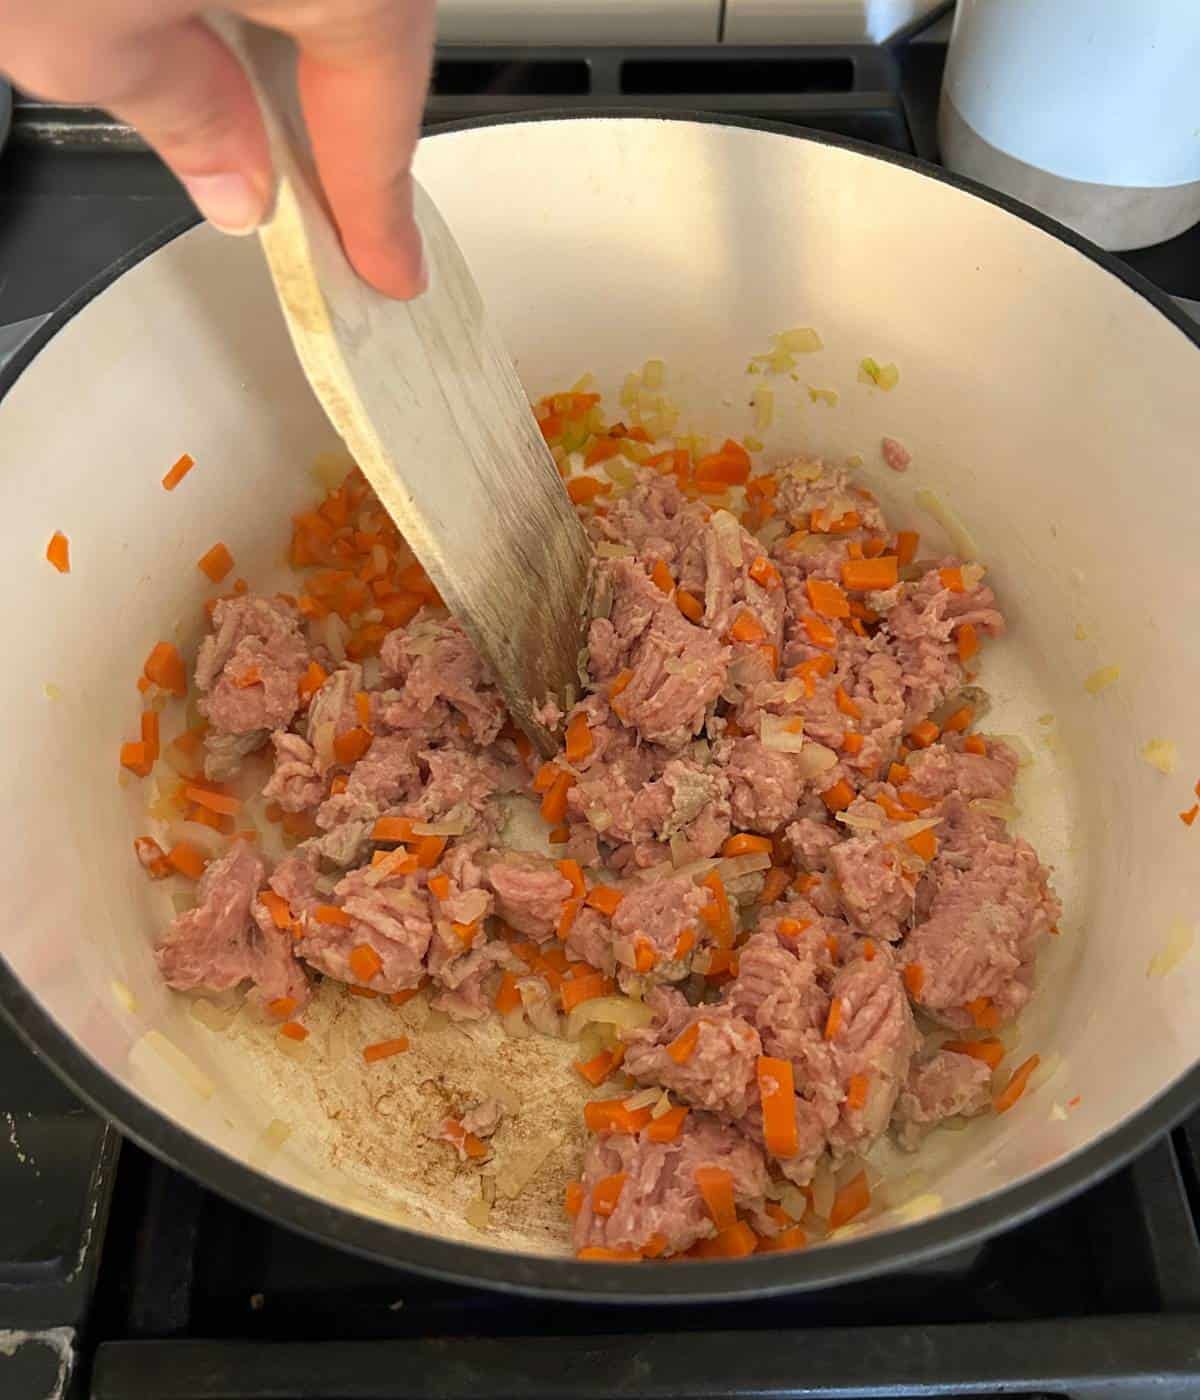 Breaking up ground turkey in pot with wooden spoon.